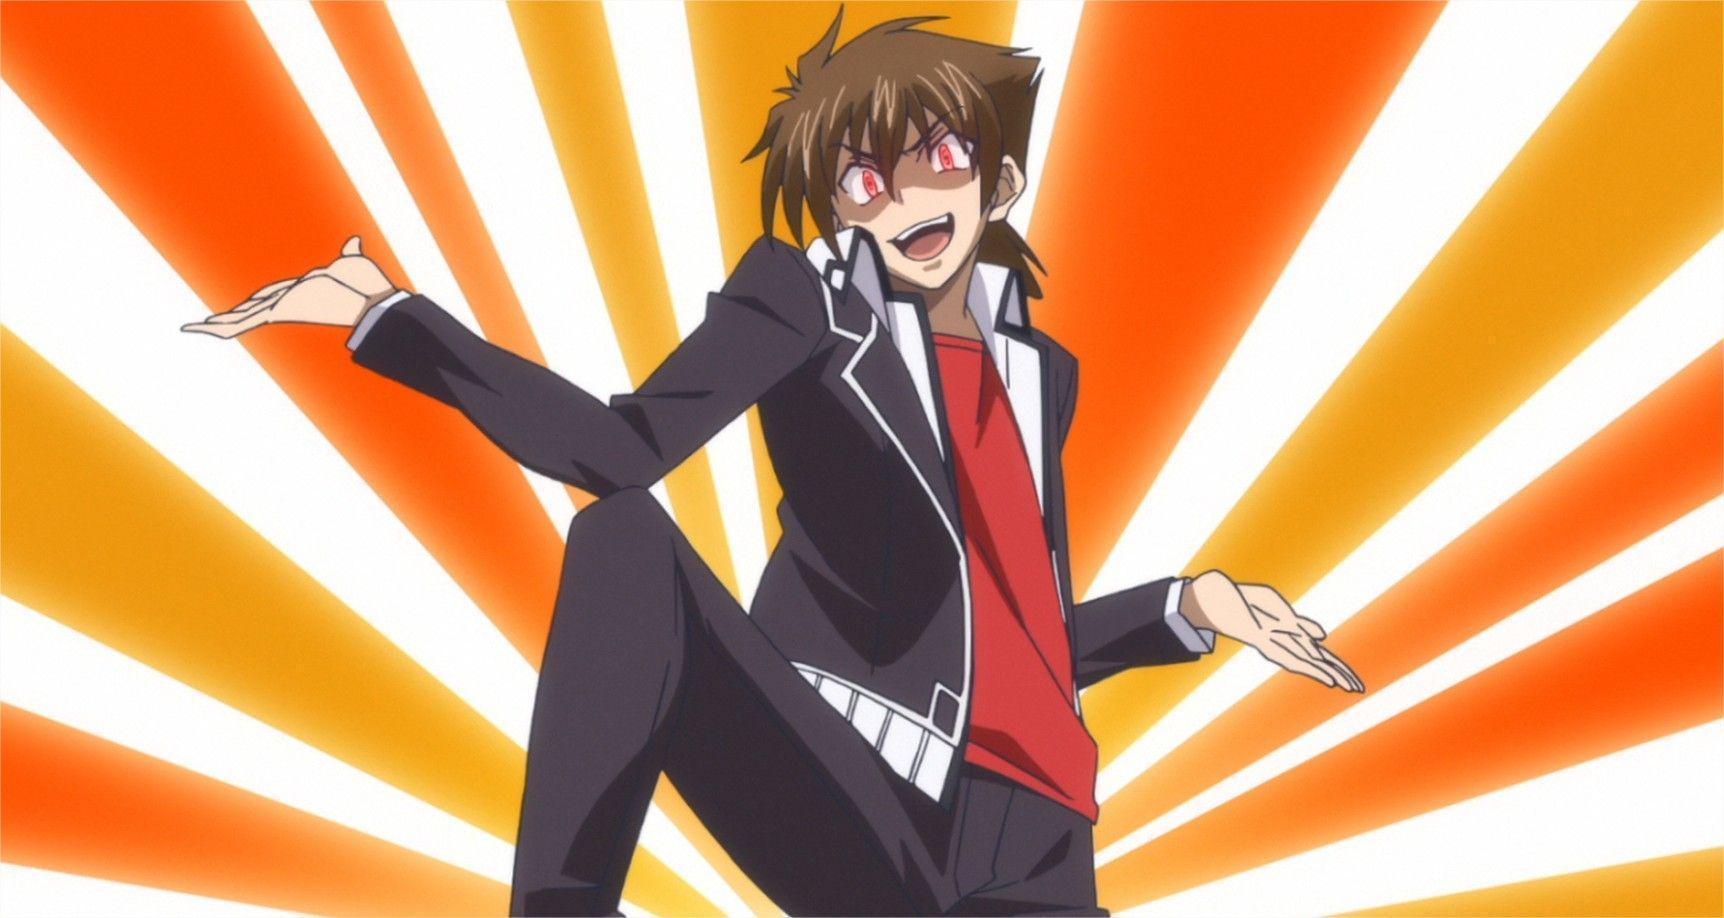 Image for Issei Hyoudou High School DxD Wallpaper. Highschool